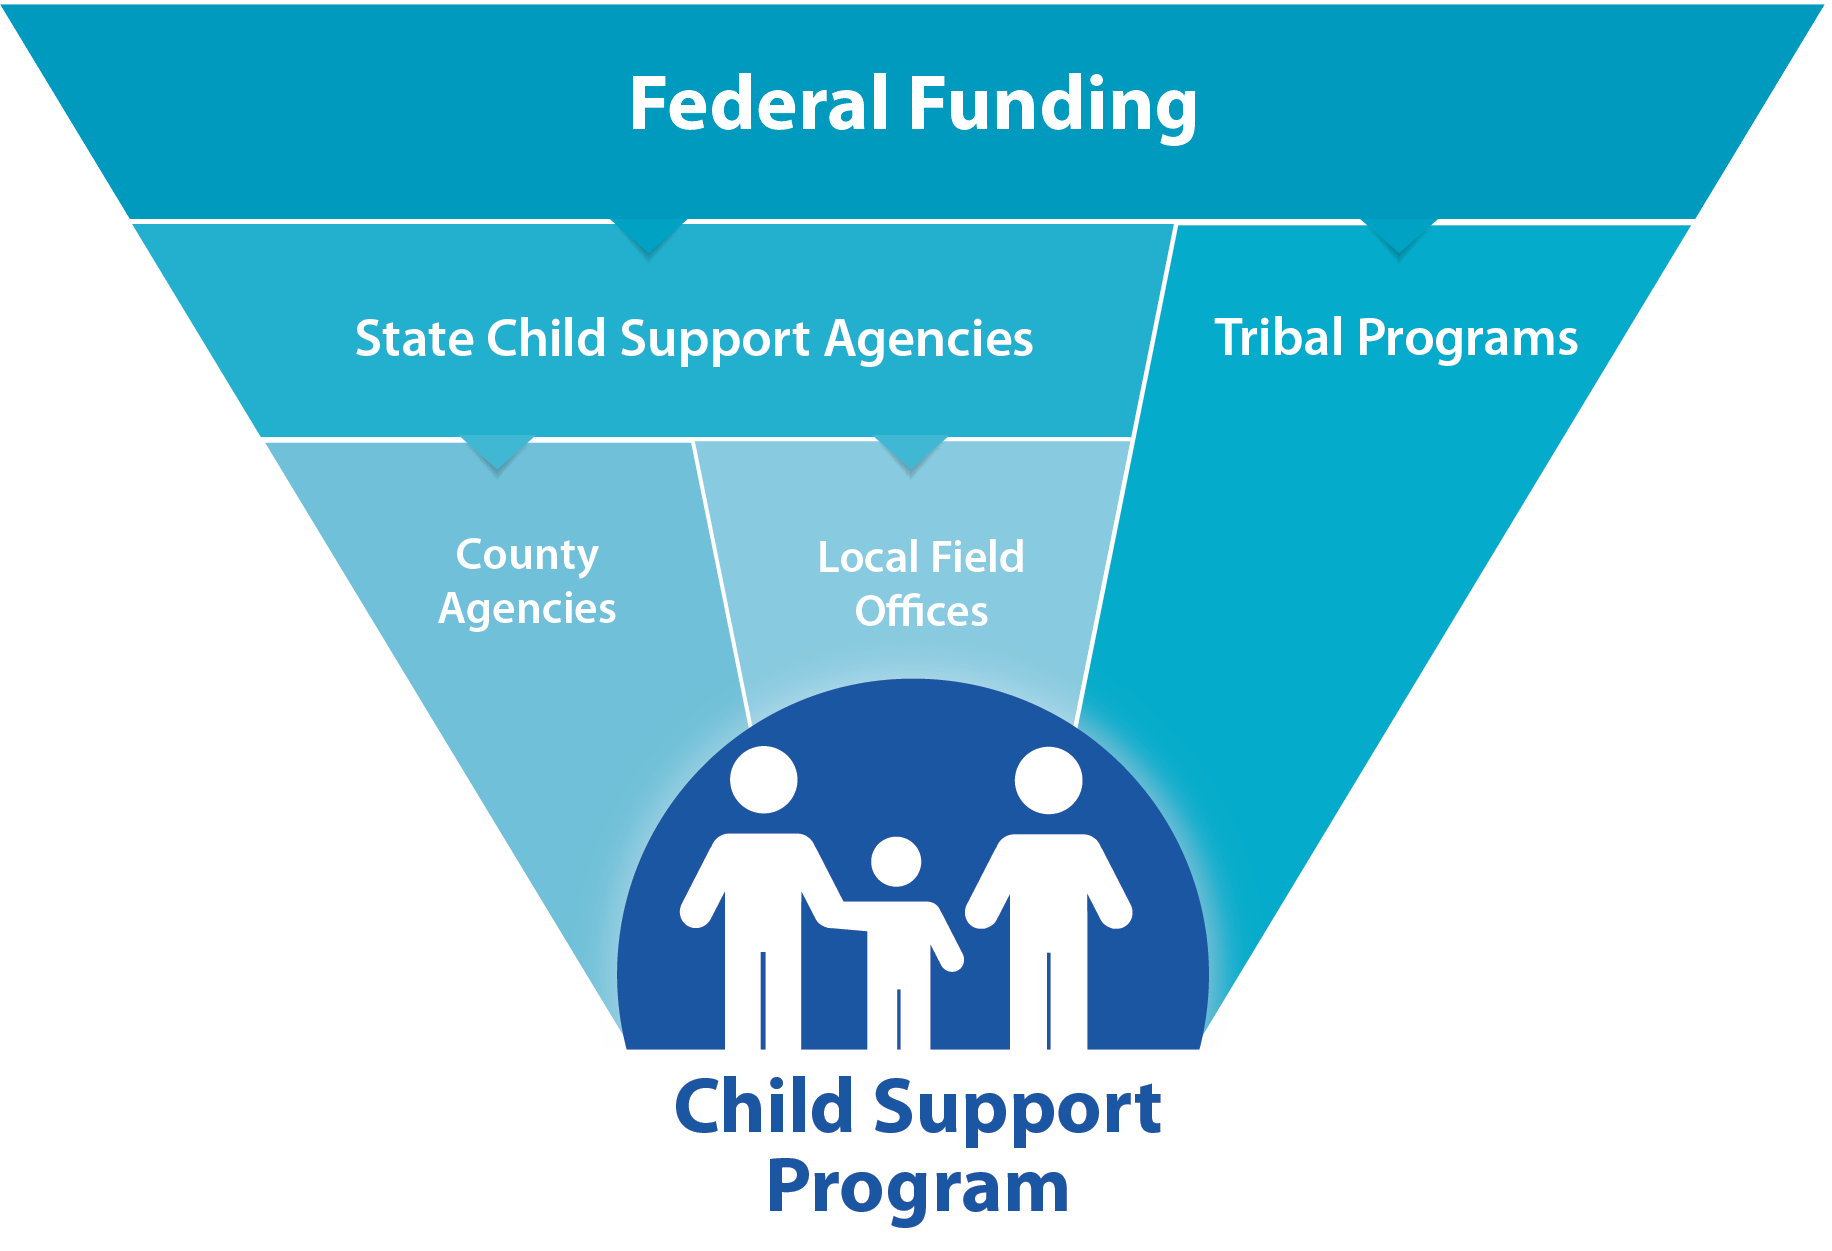 Funnel of how Federal funding of the Child Support Program works. The top of the funnel is "Federal Funding", which has two arrows leading down from it. The left arrow leads to a "State Child Support Agencies" and the right arrow leads "Tribal Programs". The funds from State Child Support Agencies is then funneled down to County Agencies and Local Field Offices. The funds end up at the bottom of the funnel with icons of a family supported by the Child Support Program.